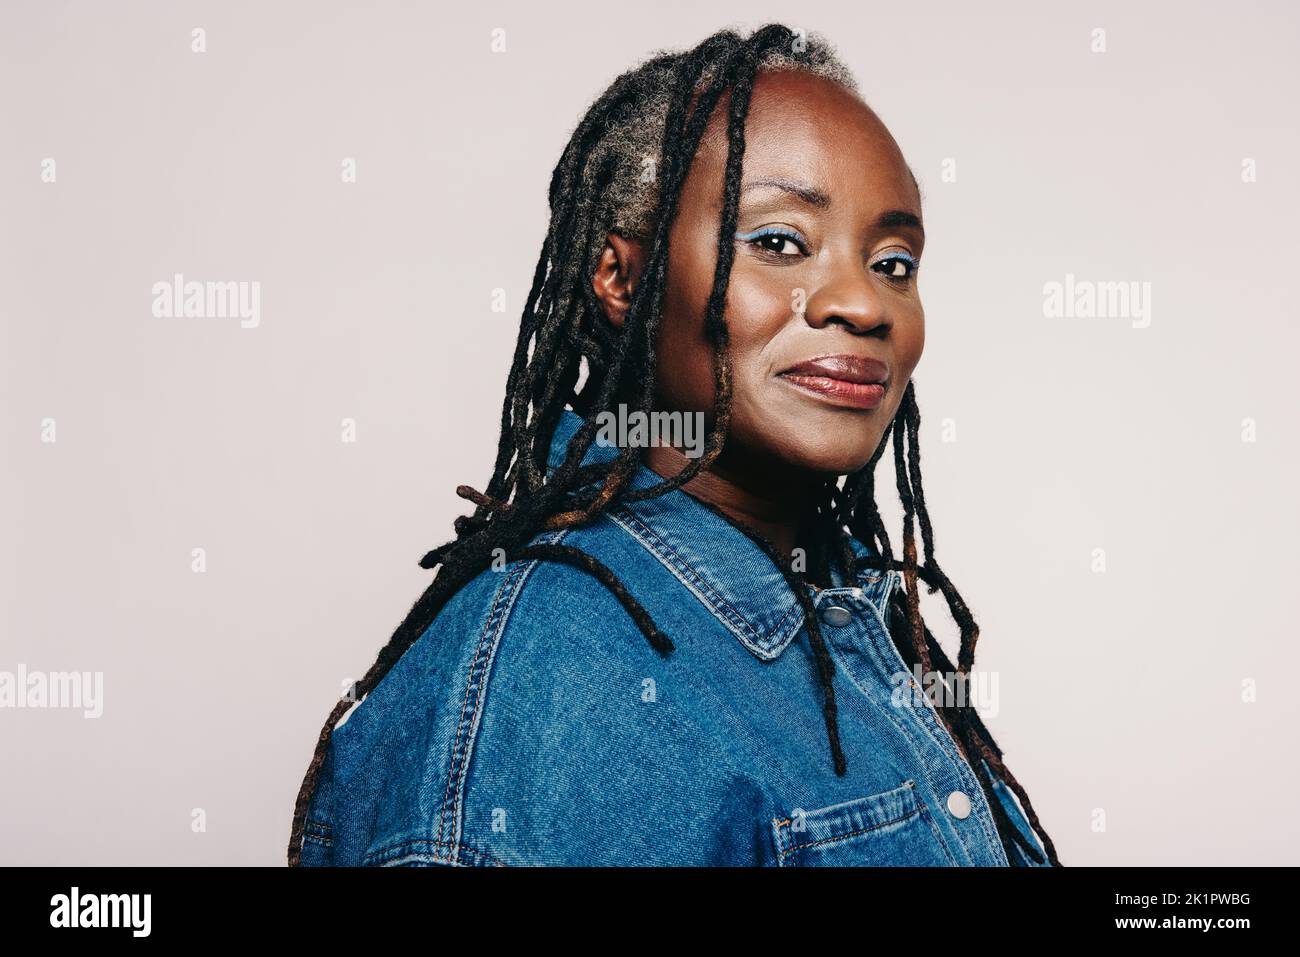 Stylish woman with dreadlocks looking at the camera while standing against a grey background. Portrait of a mature woman wearing a denim jacket and ma Stock Photo